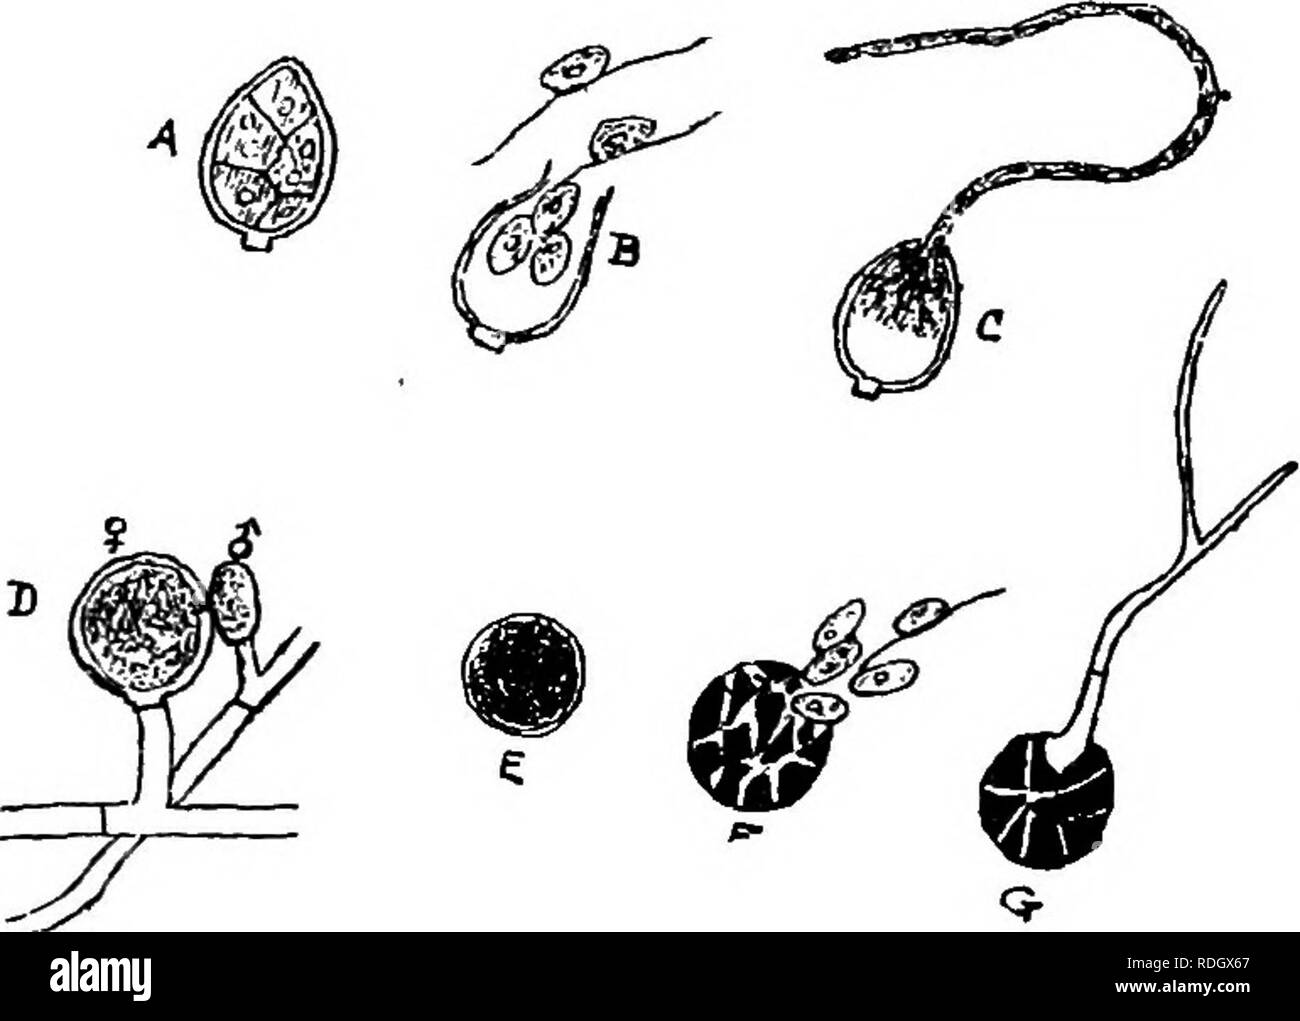 . The diseases of crops and their remedies : a handbook of economic biology for farmers and students. Plant diseases. ROOT CHOPS. 53 22 D); and to reproductive organs (Fig. 22 F) within the host-plant. The protoplasm of the conidia either divides or gives rise to a hypha or &quot; germ tube &quot; (Fig. 23). When it divides it produces a number of zoospores provided with cilia (iilaments) (Fig. 23 B). The zoospores float about in the atmosphere and thereby spread the disease. Ulti- mately the cilia disappear, and the zoospores settle down upon the leaves of the potato plant, giving rise to ano Stock Photo